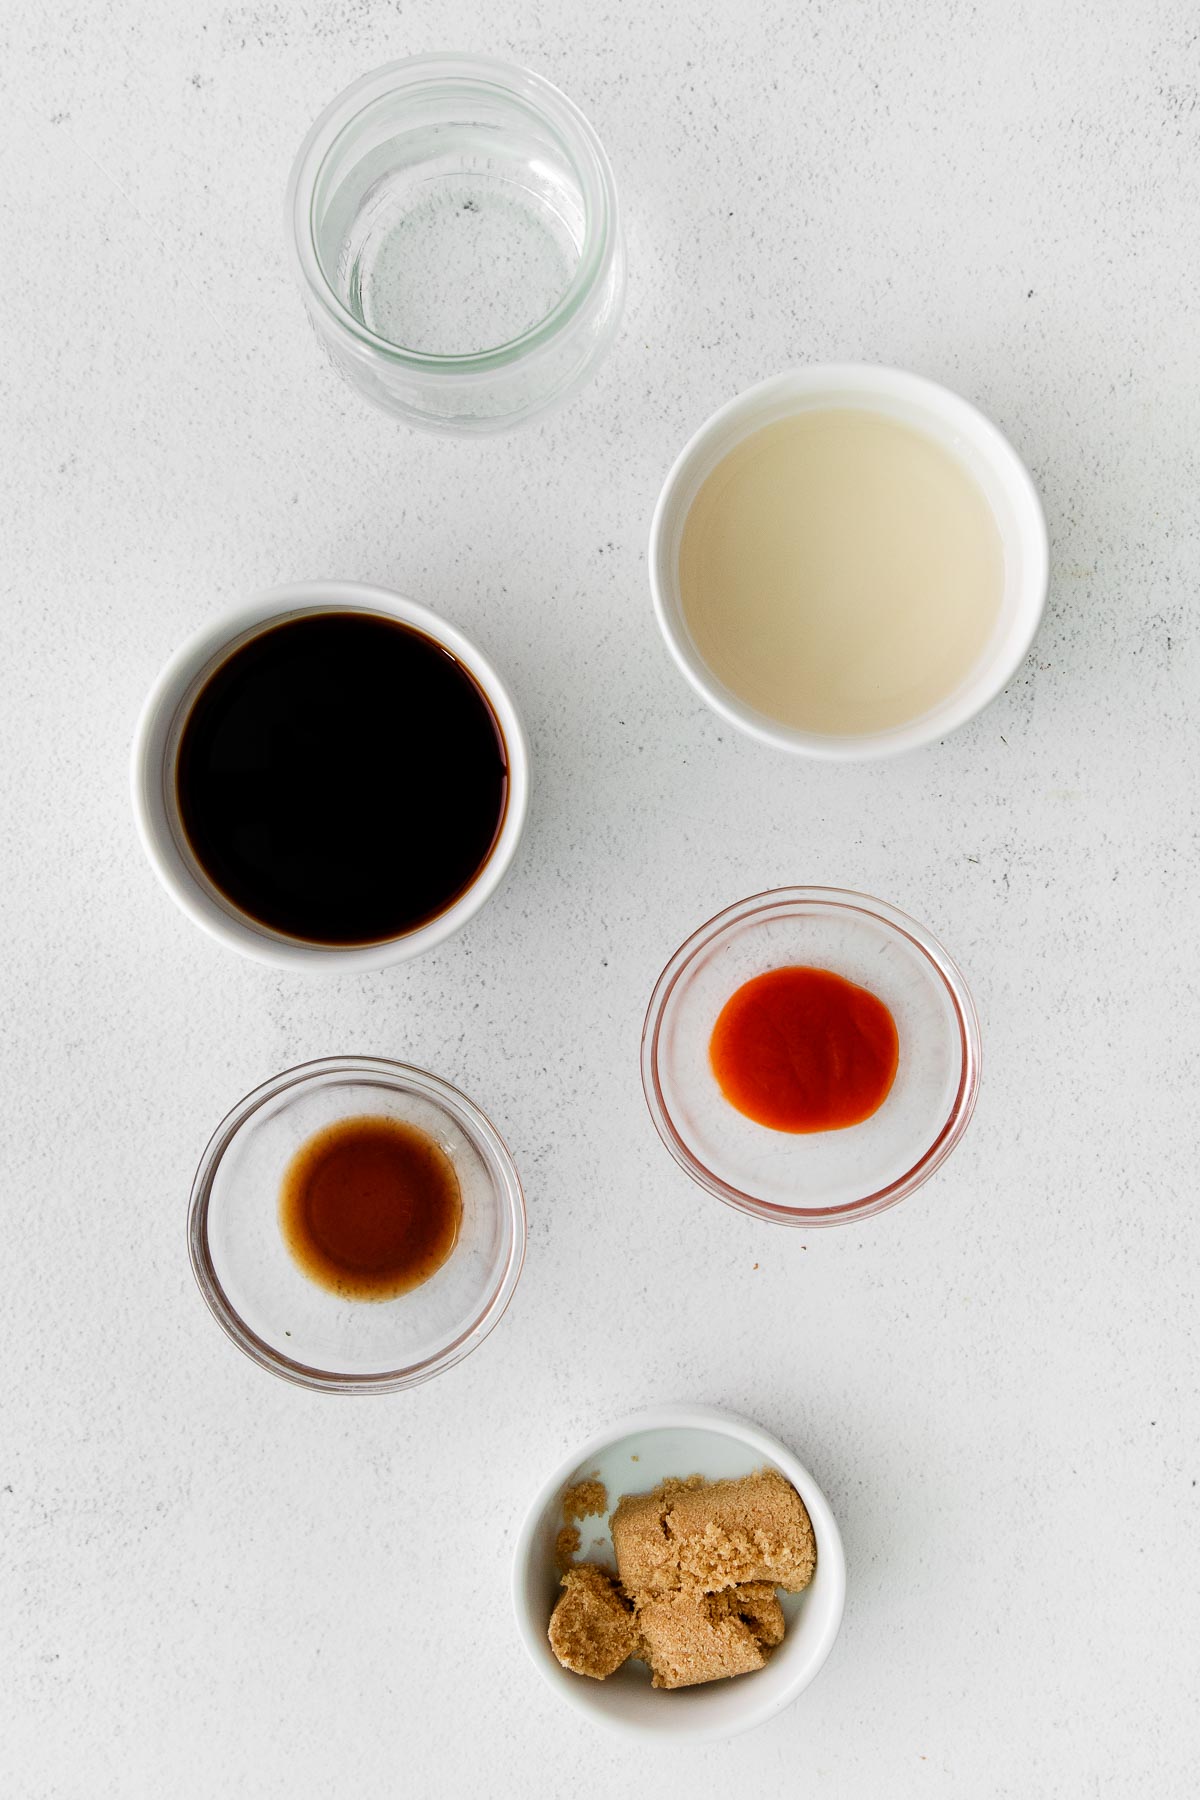 several small bowls with ingredients for thai stir fry sauce - brown sugar, soy sauce, fish sauce, water, and sriracha